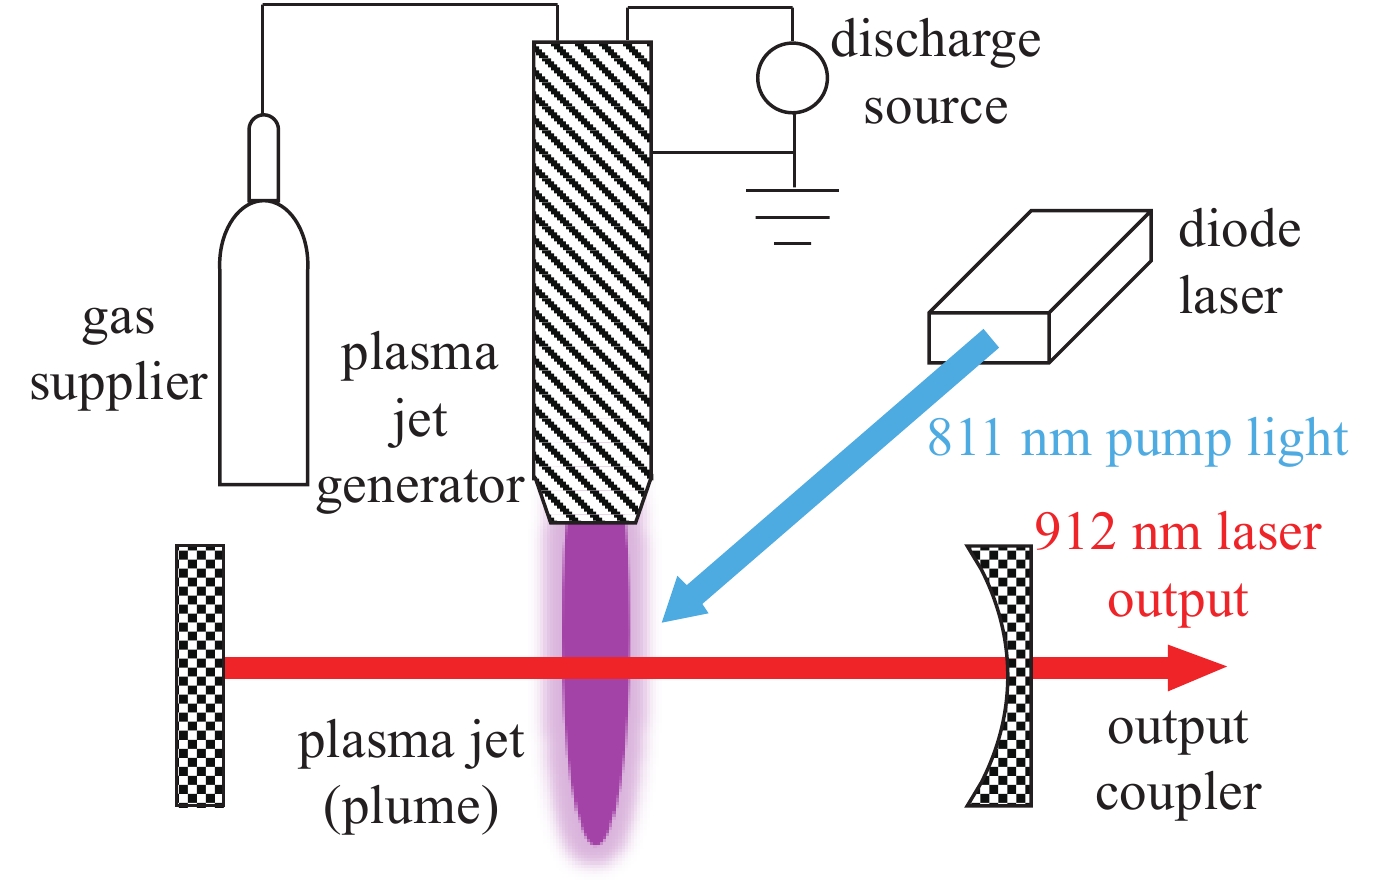 Scheme of diode pumped metastable rare gas laser in a plasma jet configuration